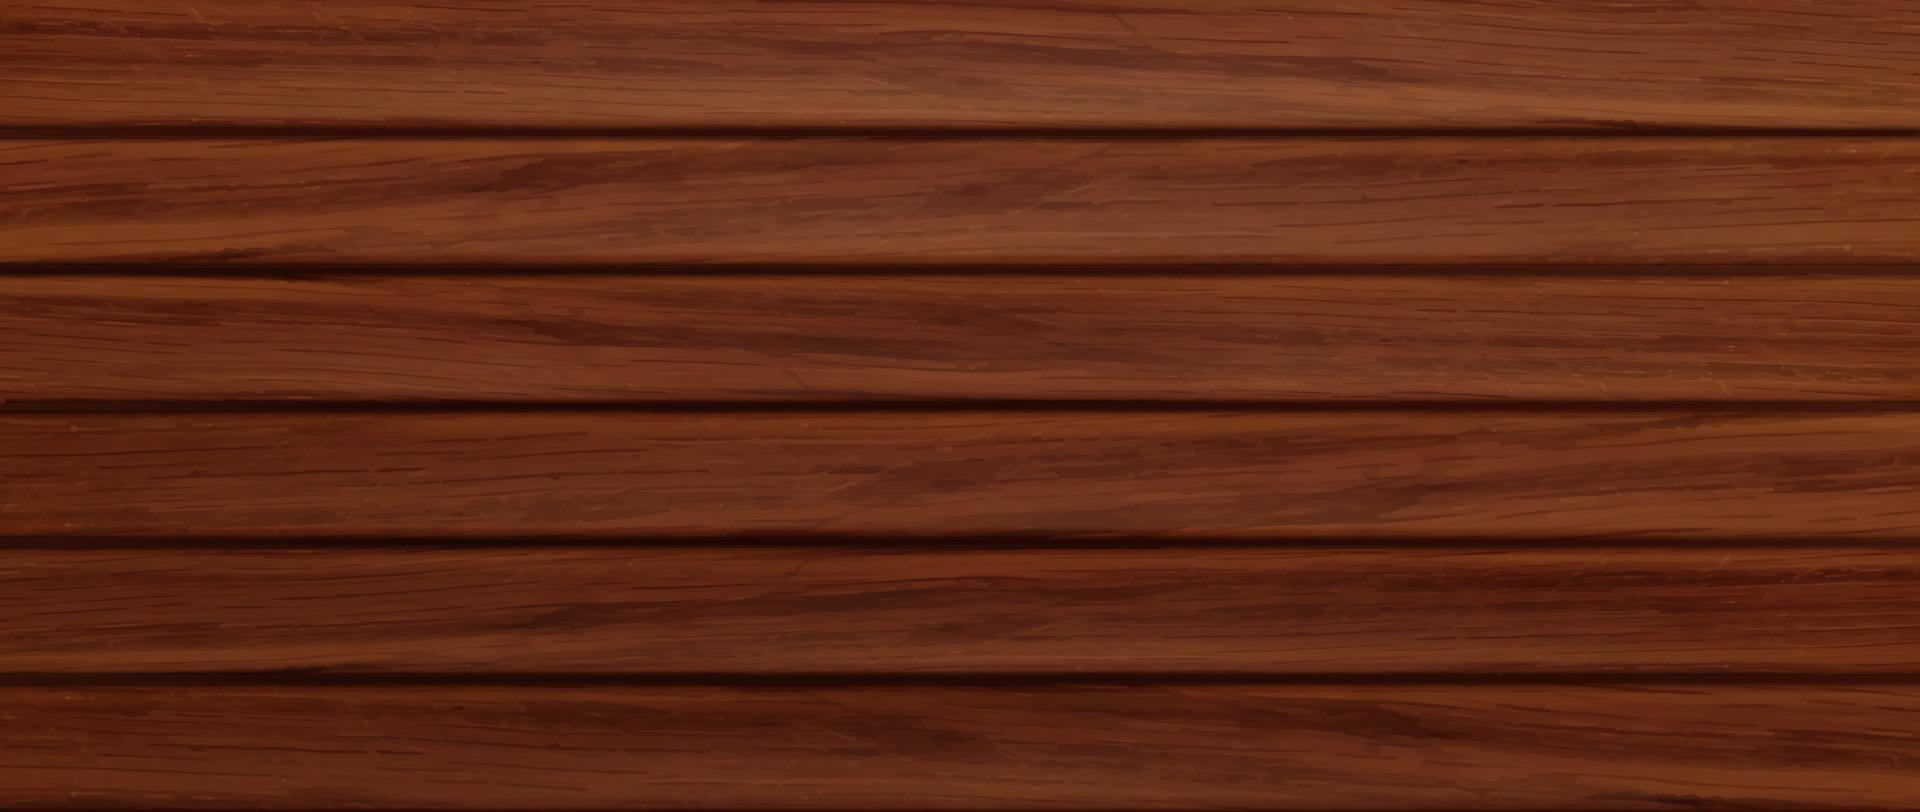 Wooden background, texture of brown wood planks vector